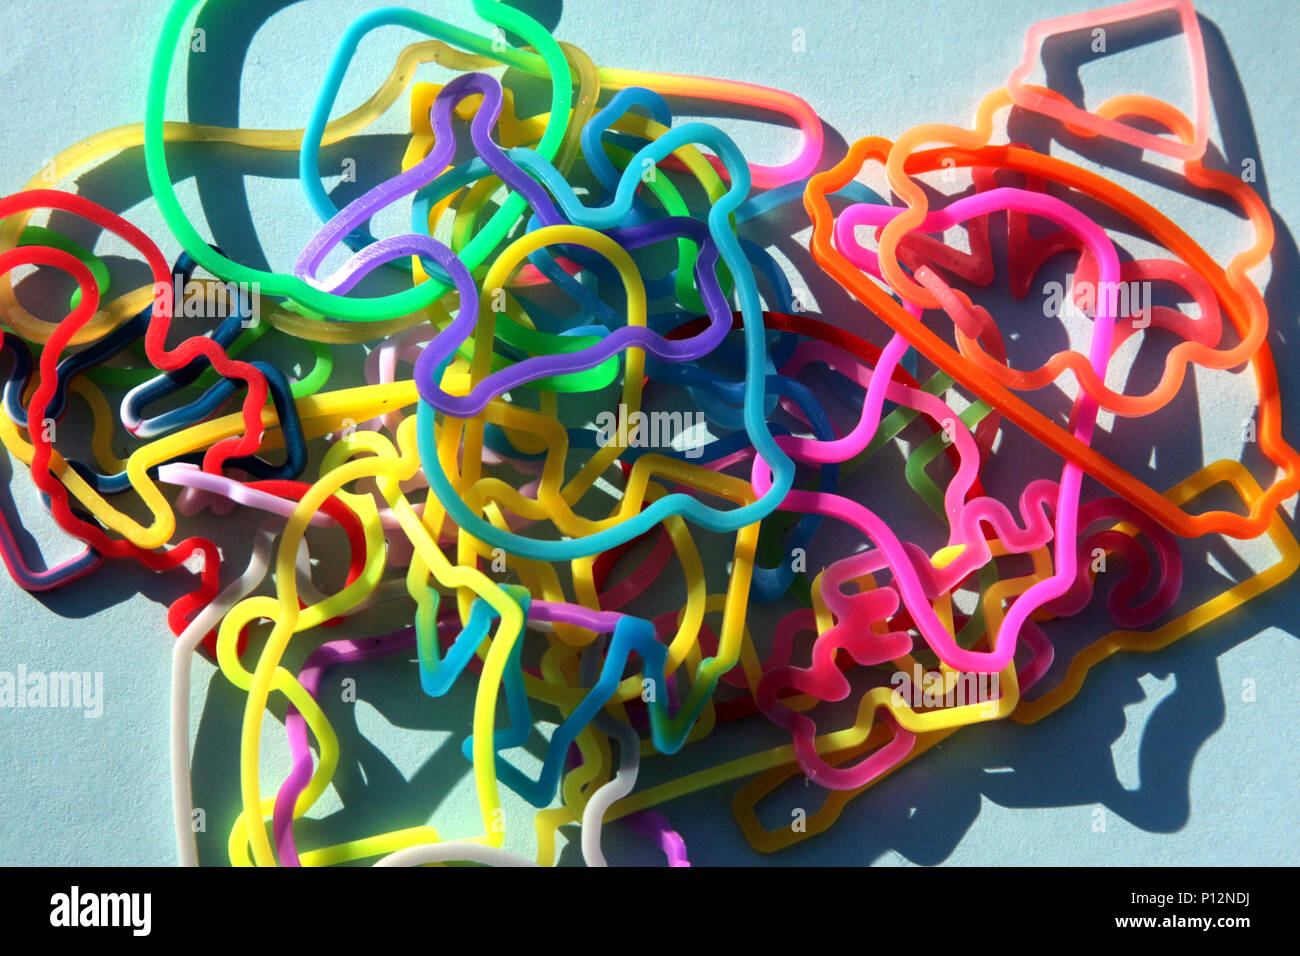 Bunte Silly-Bands Stockfoto